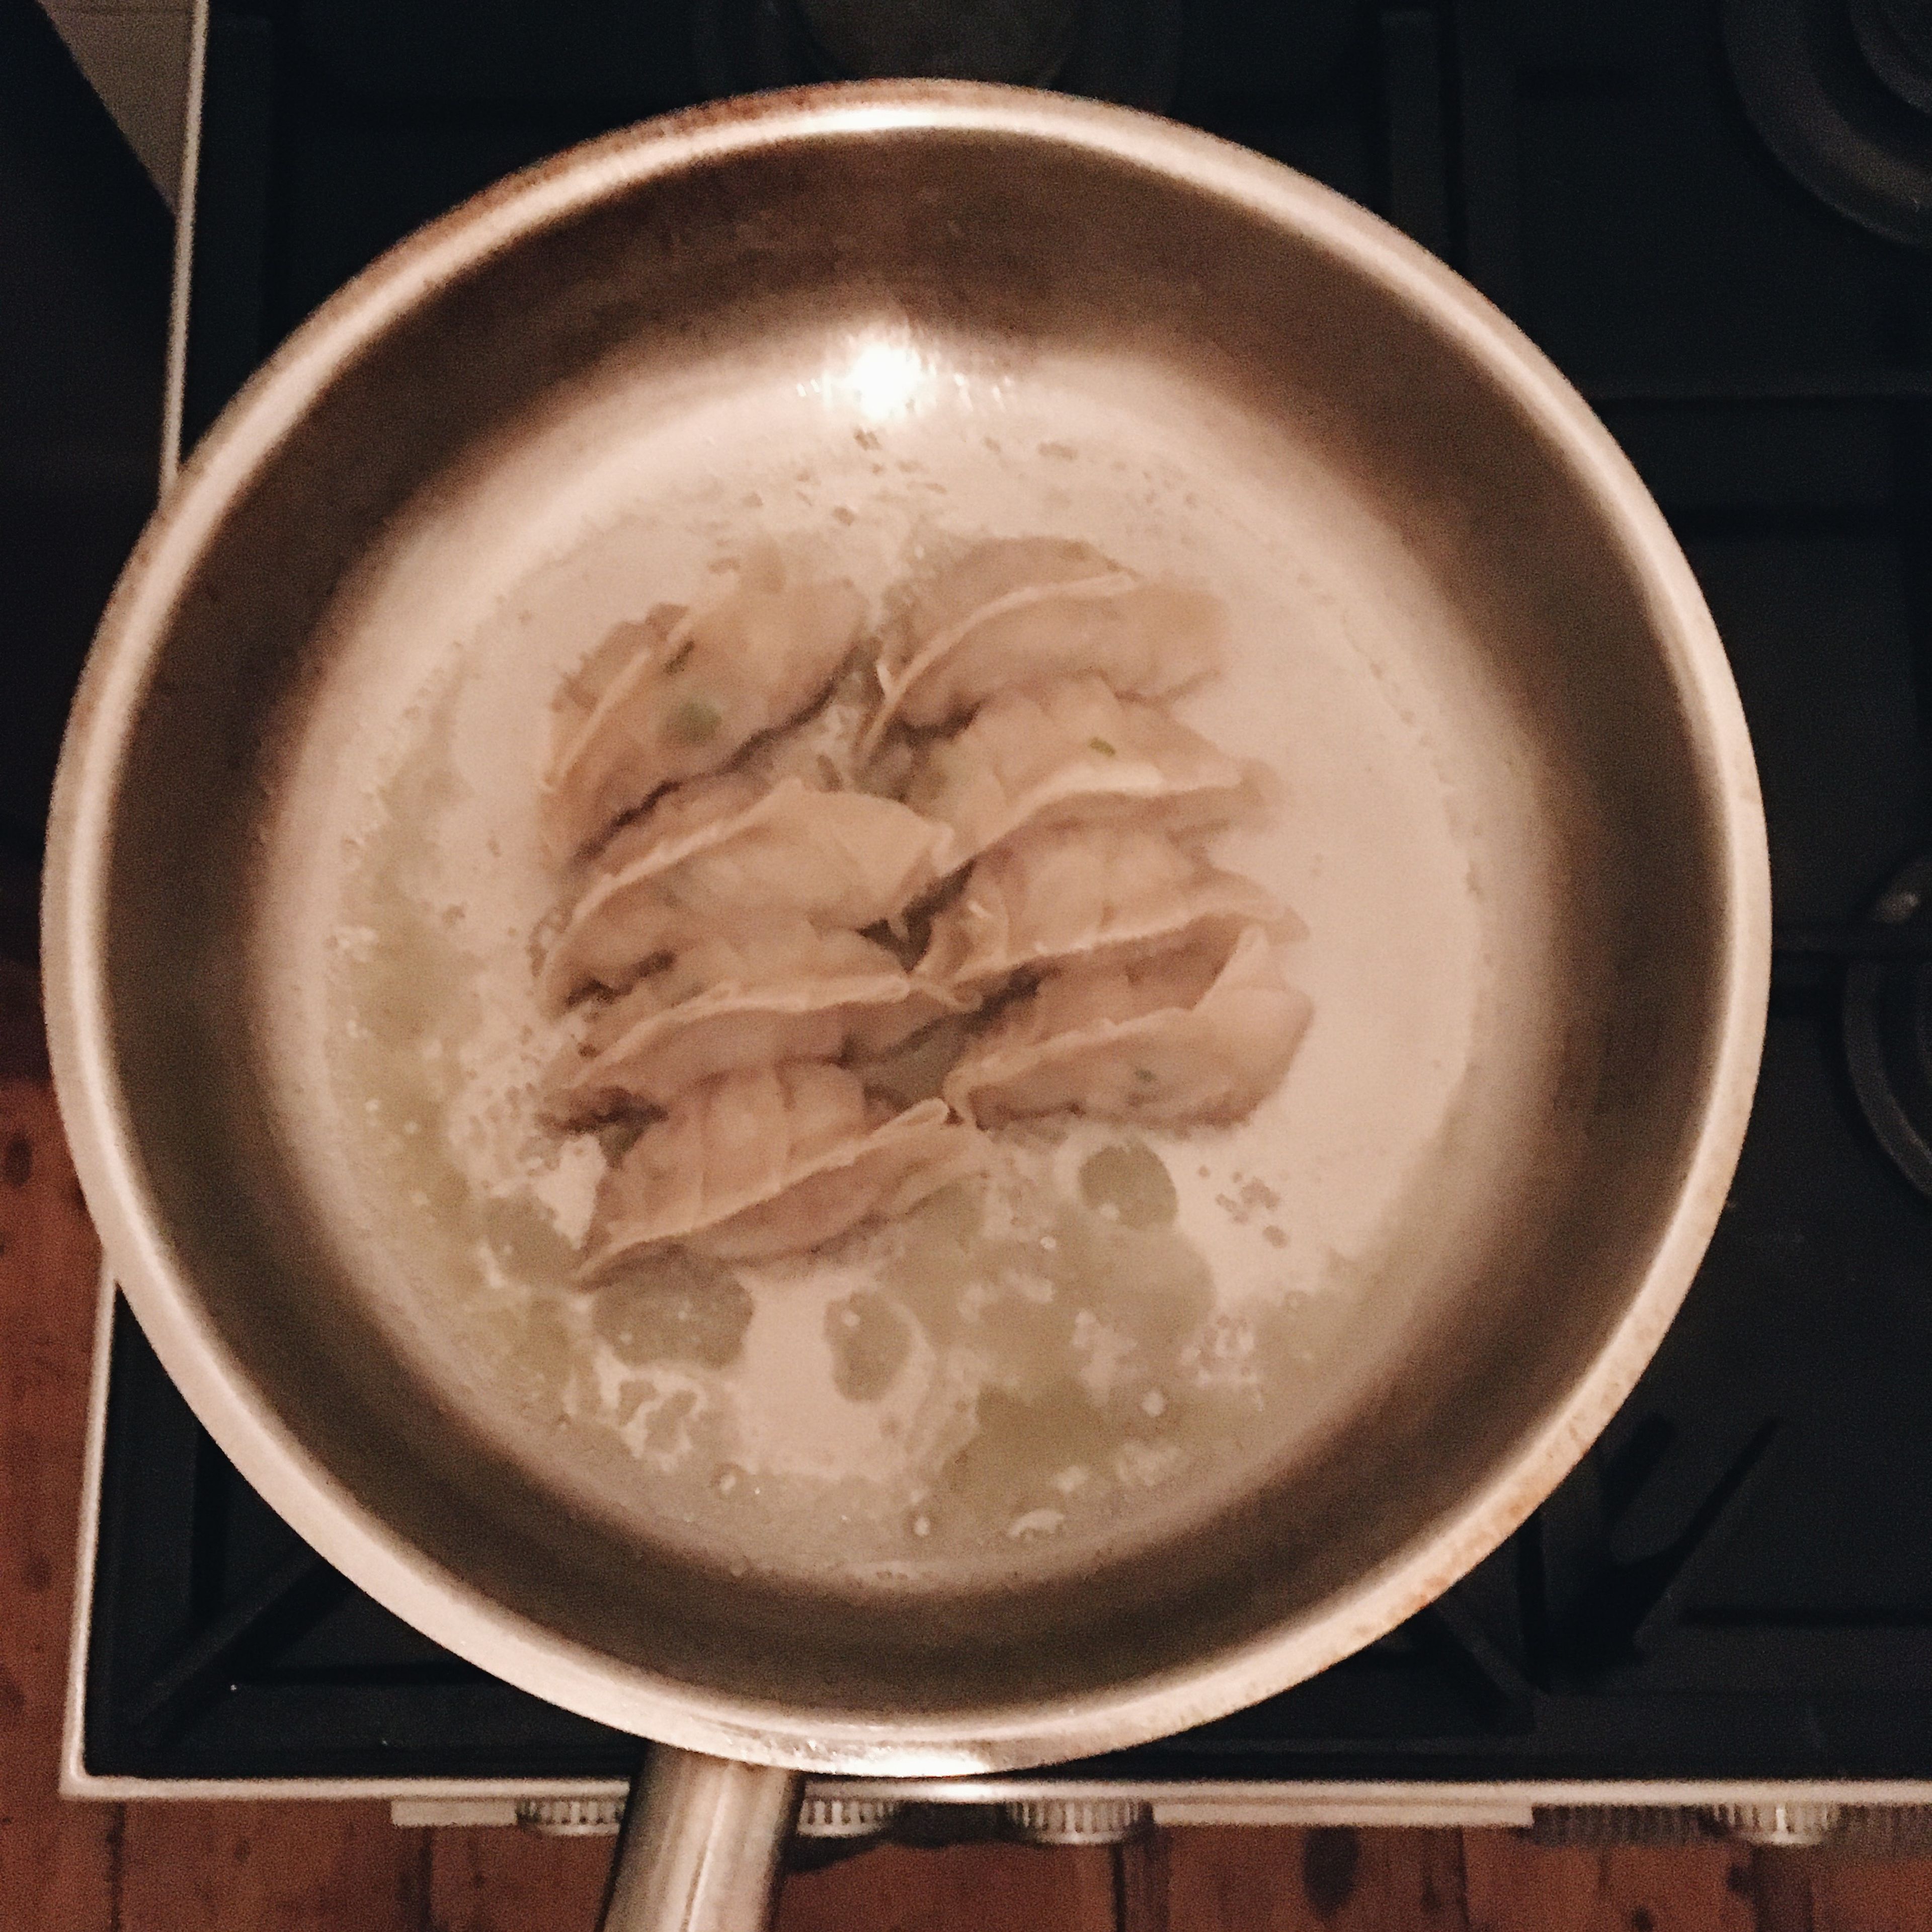 Pour water into the pan around the gyoza and place a lid. Steam the gyoza until the water is evaporated, roughly 5 min.